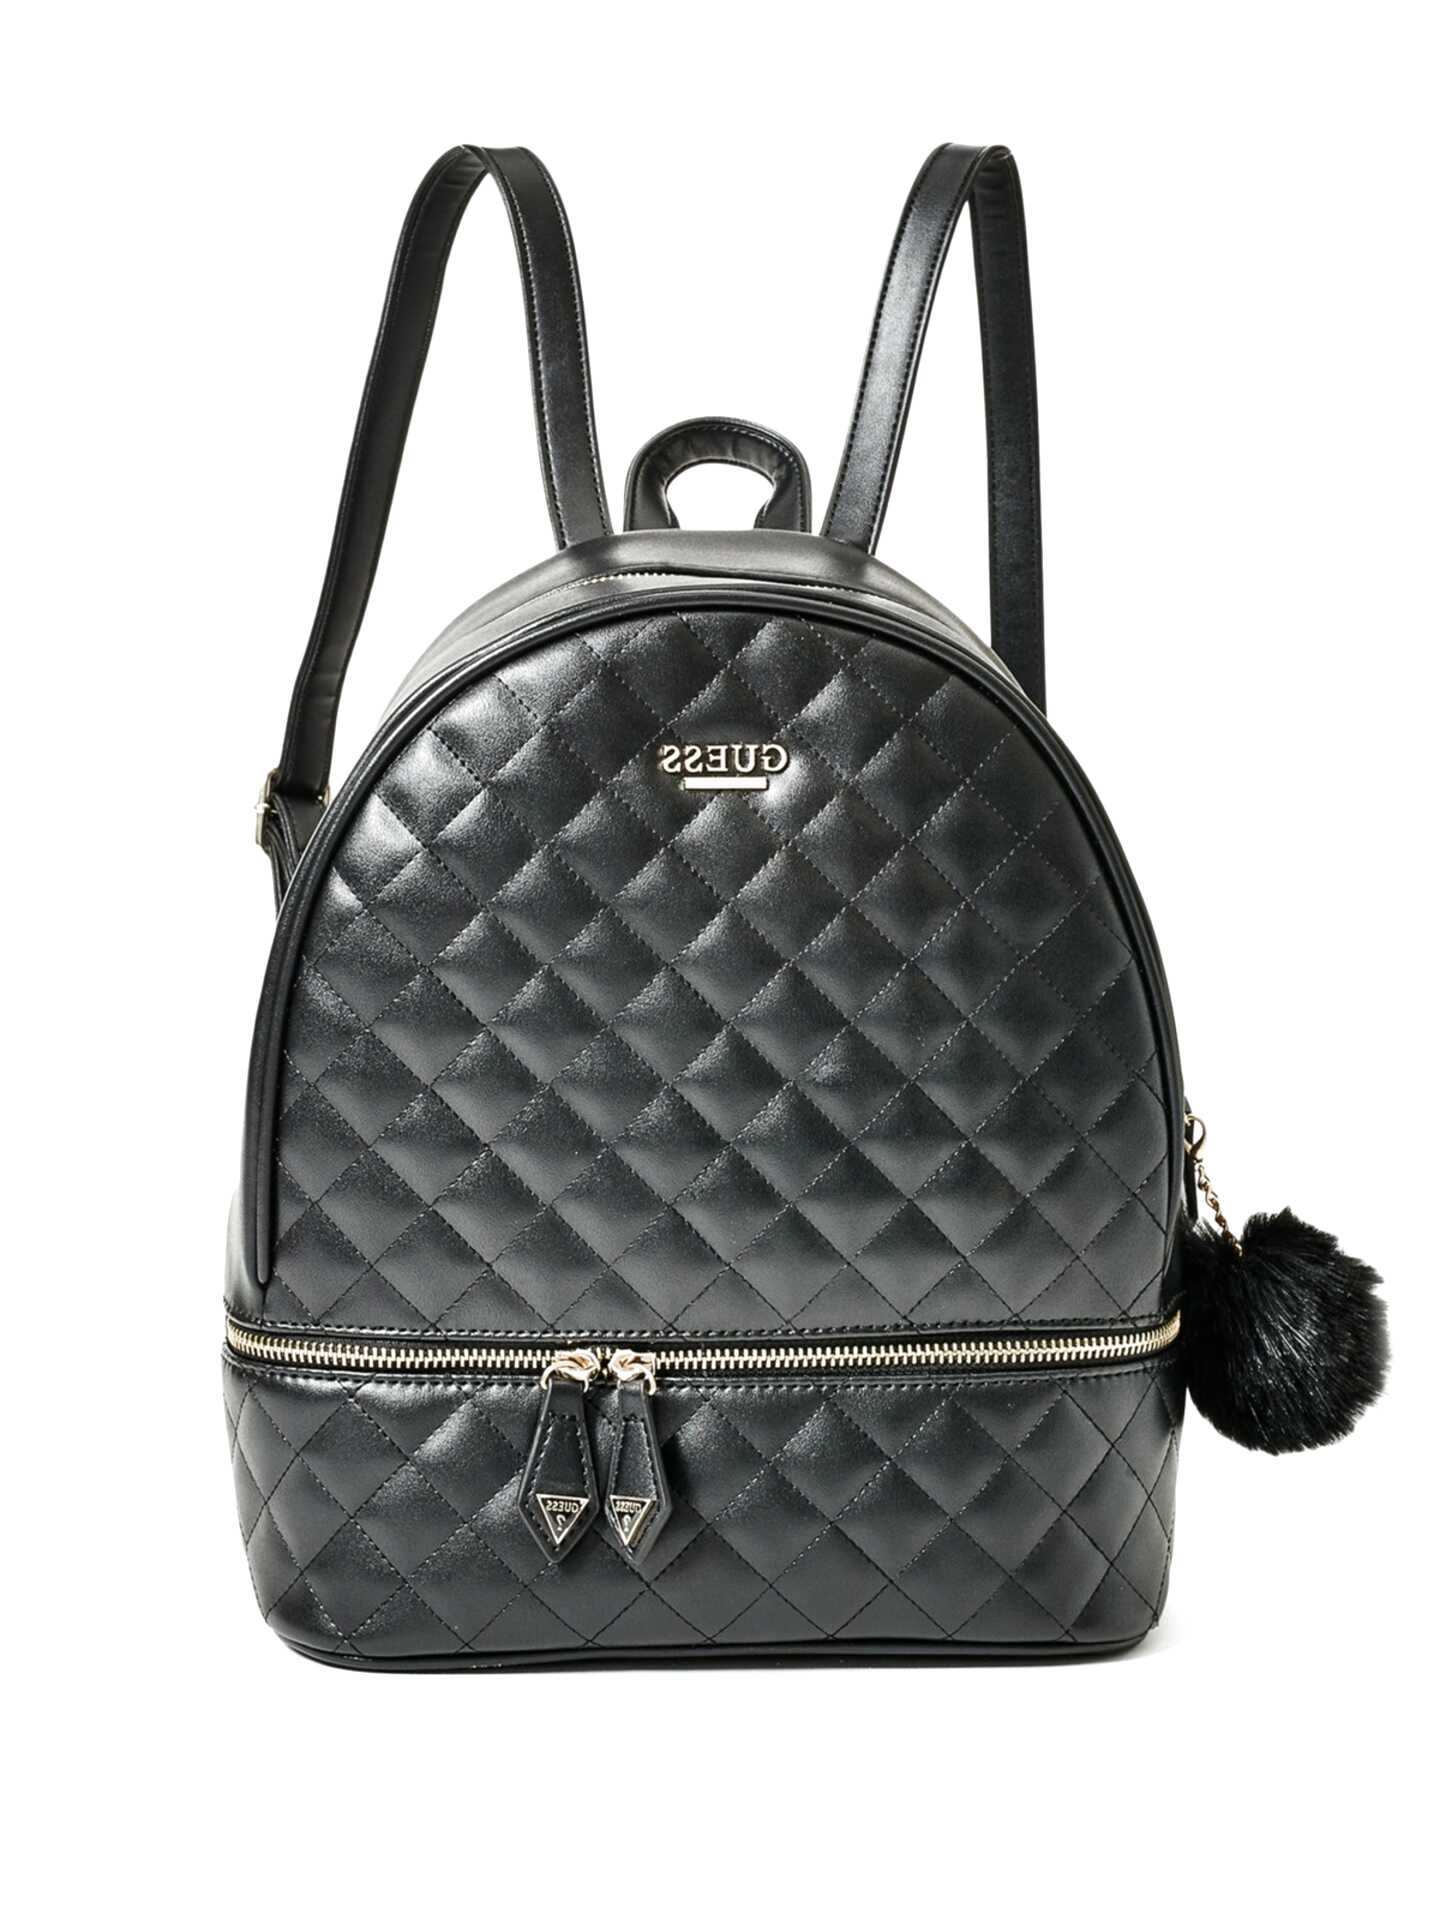 Guess Backpack Bag for sale in UK | View 65 bargains